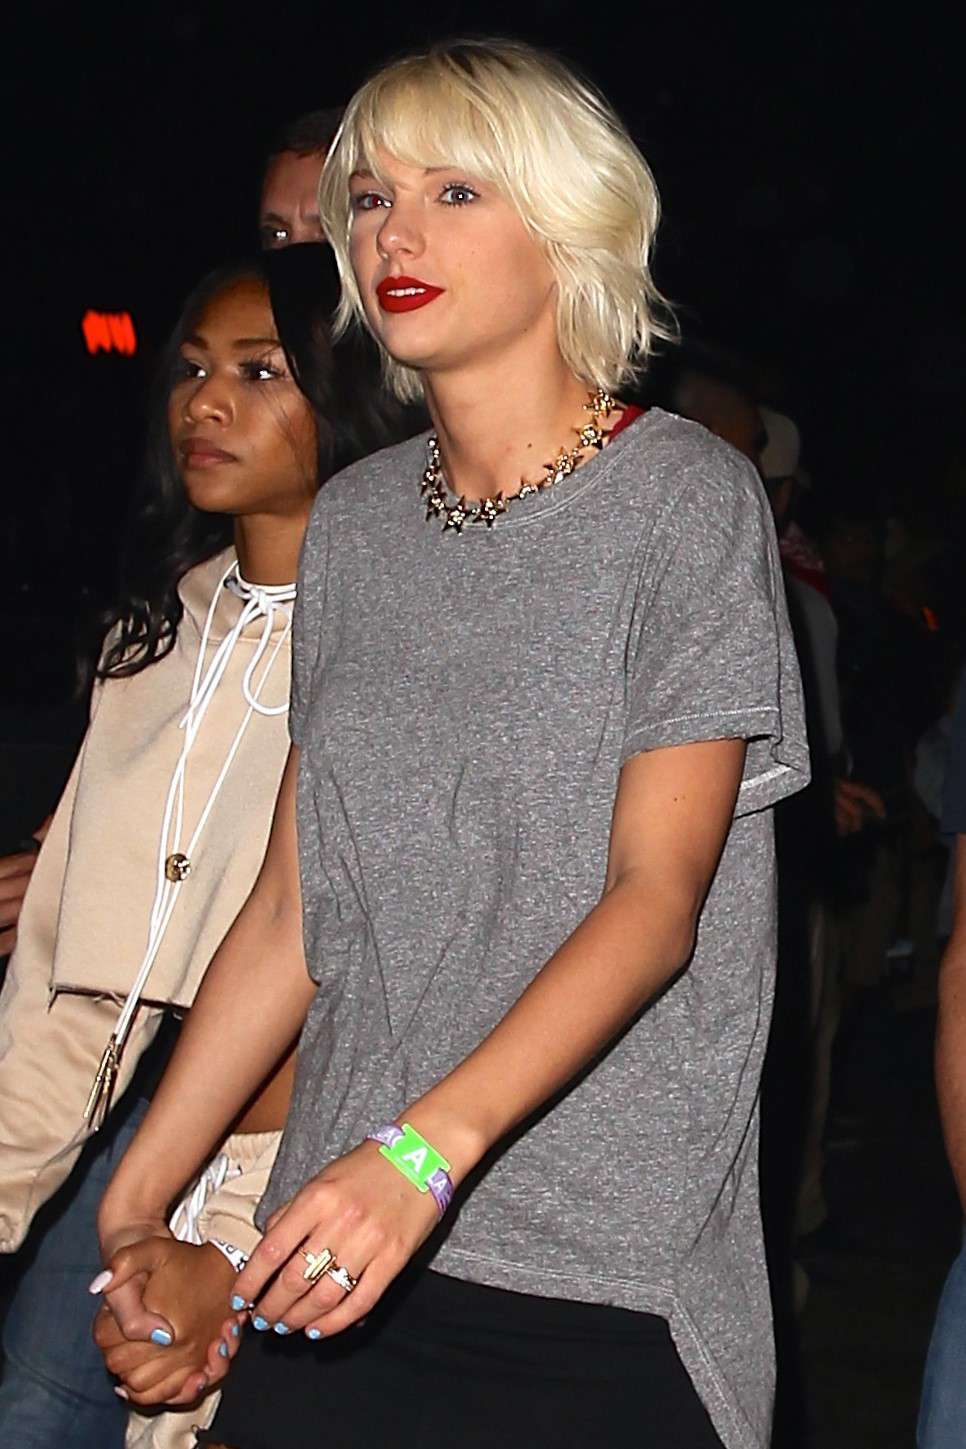 Taylor Swift was seen showing some major leg at the desert festival. The 1989 singer was seen in a simple outfit, but what was noticeable was the new hair that she debuted on the cover of Vogue! Swift rocked a short platinum hairdo with bangs as she and a friend walked through the polo fields at night. AKM-GSI 